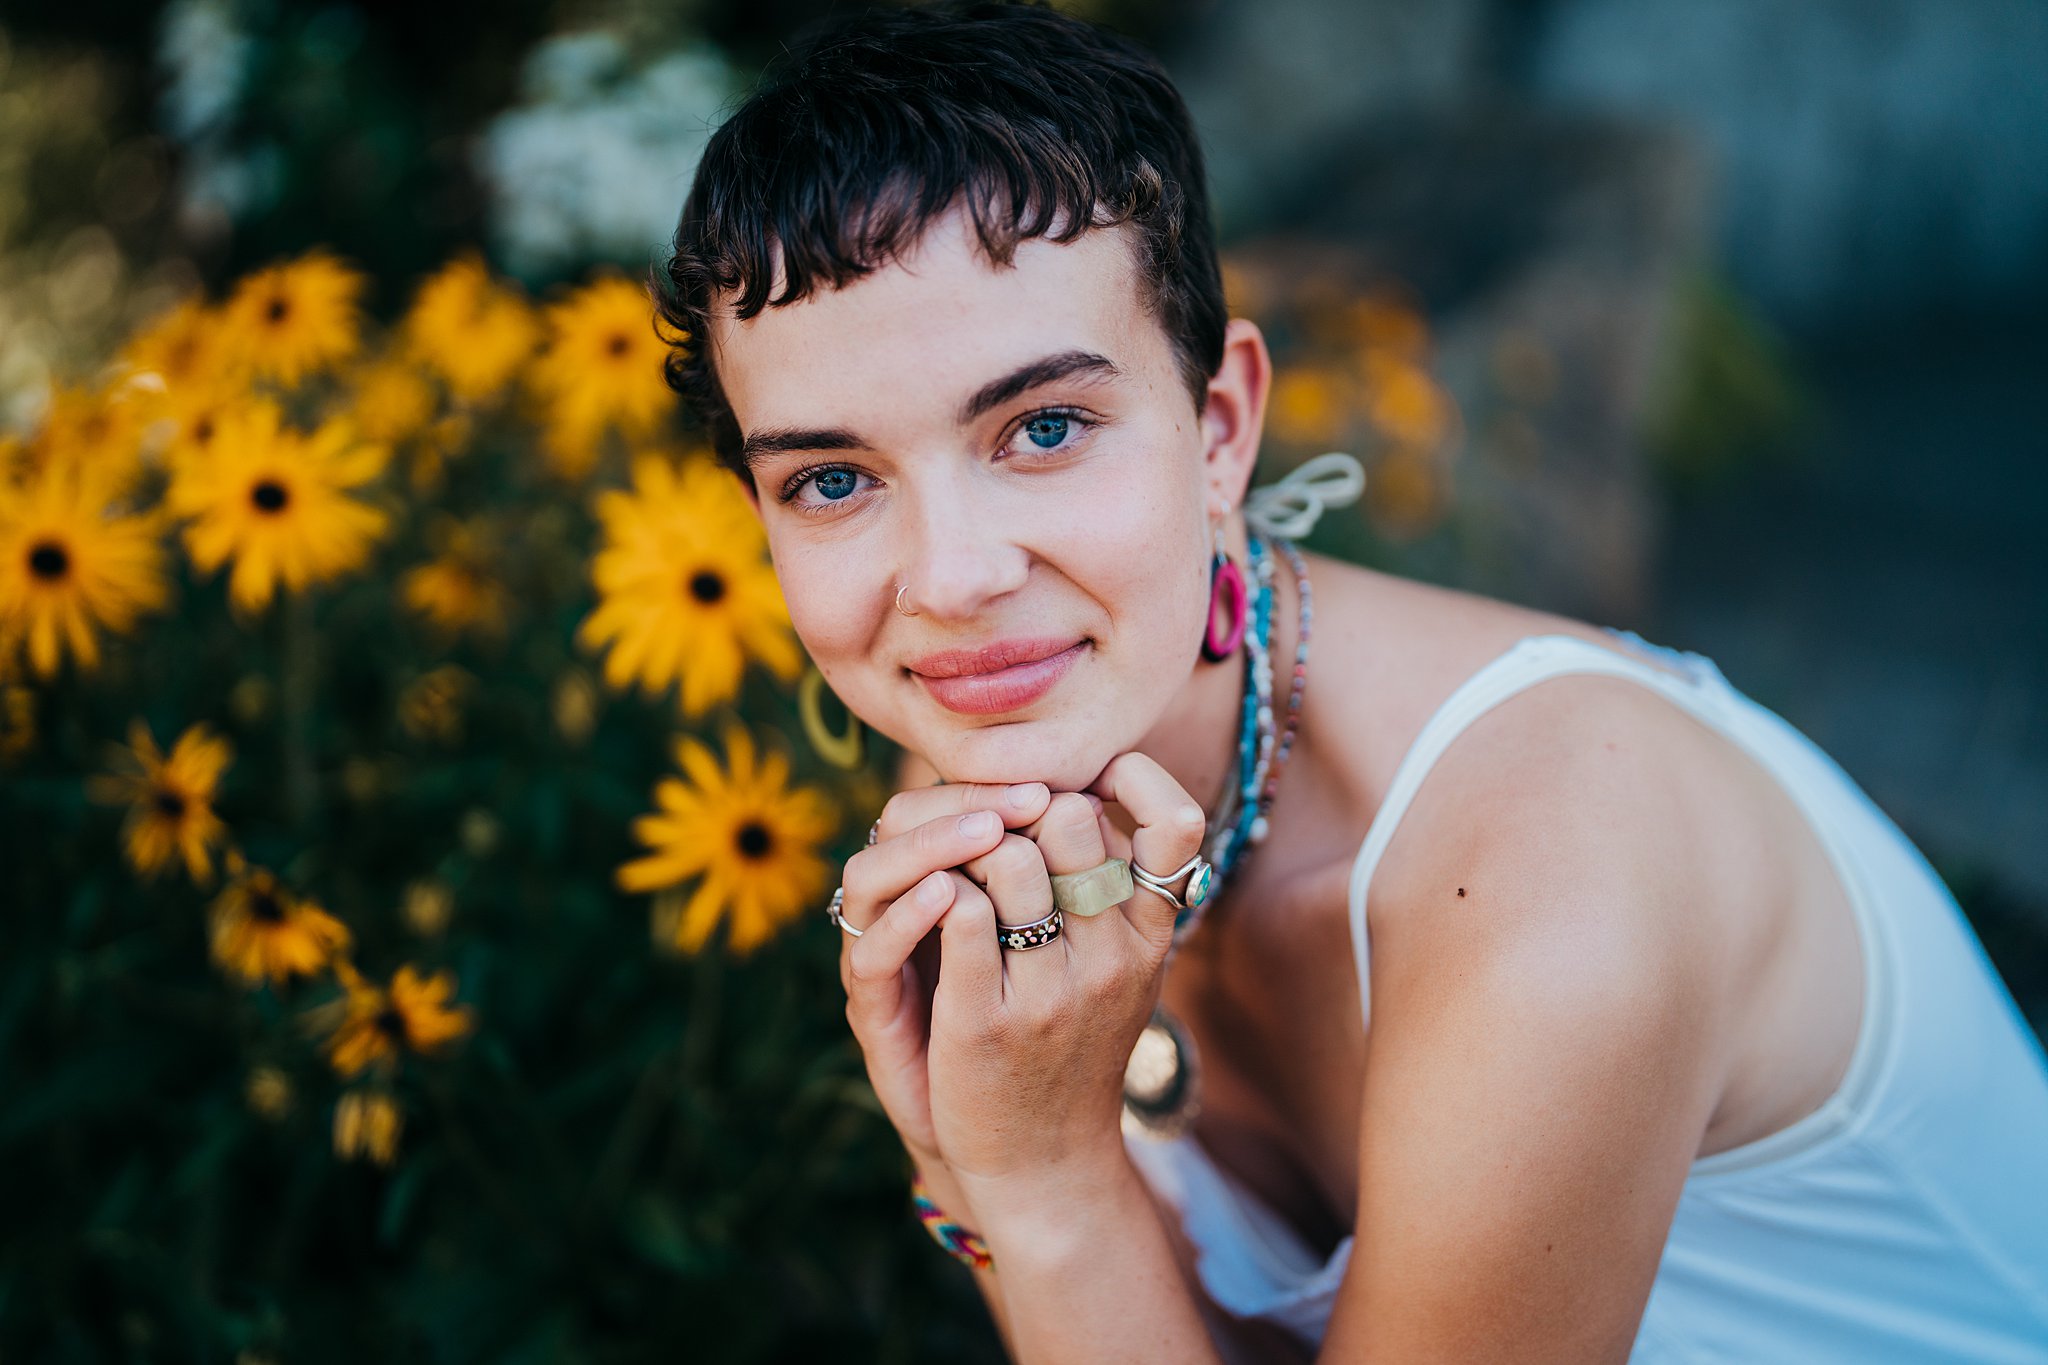 A woman wearing multiple rings and a white top sits with some yellow daisies Seattle Photoshoot Locations